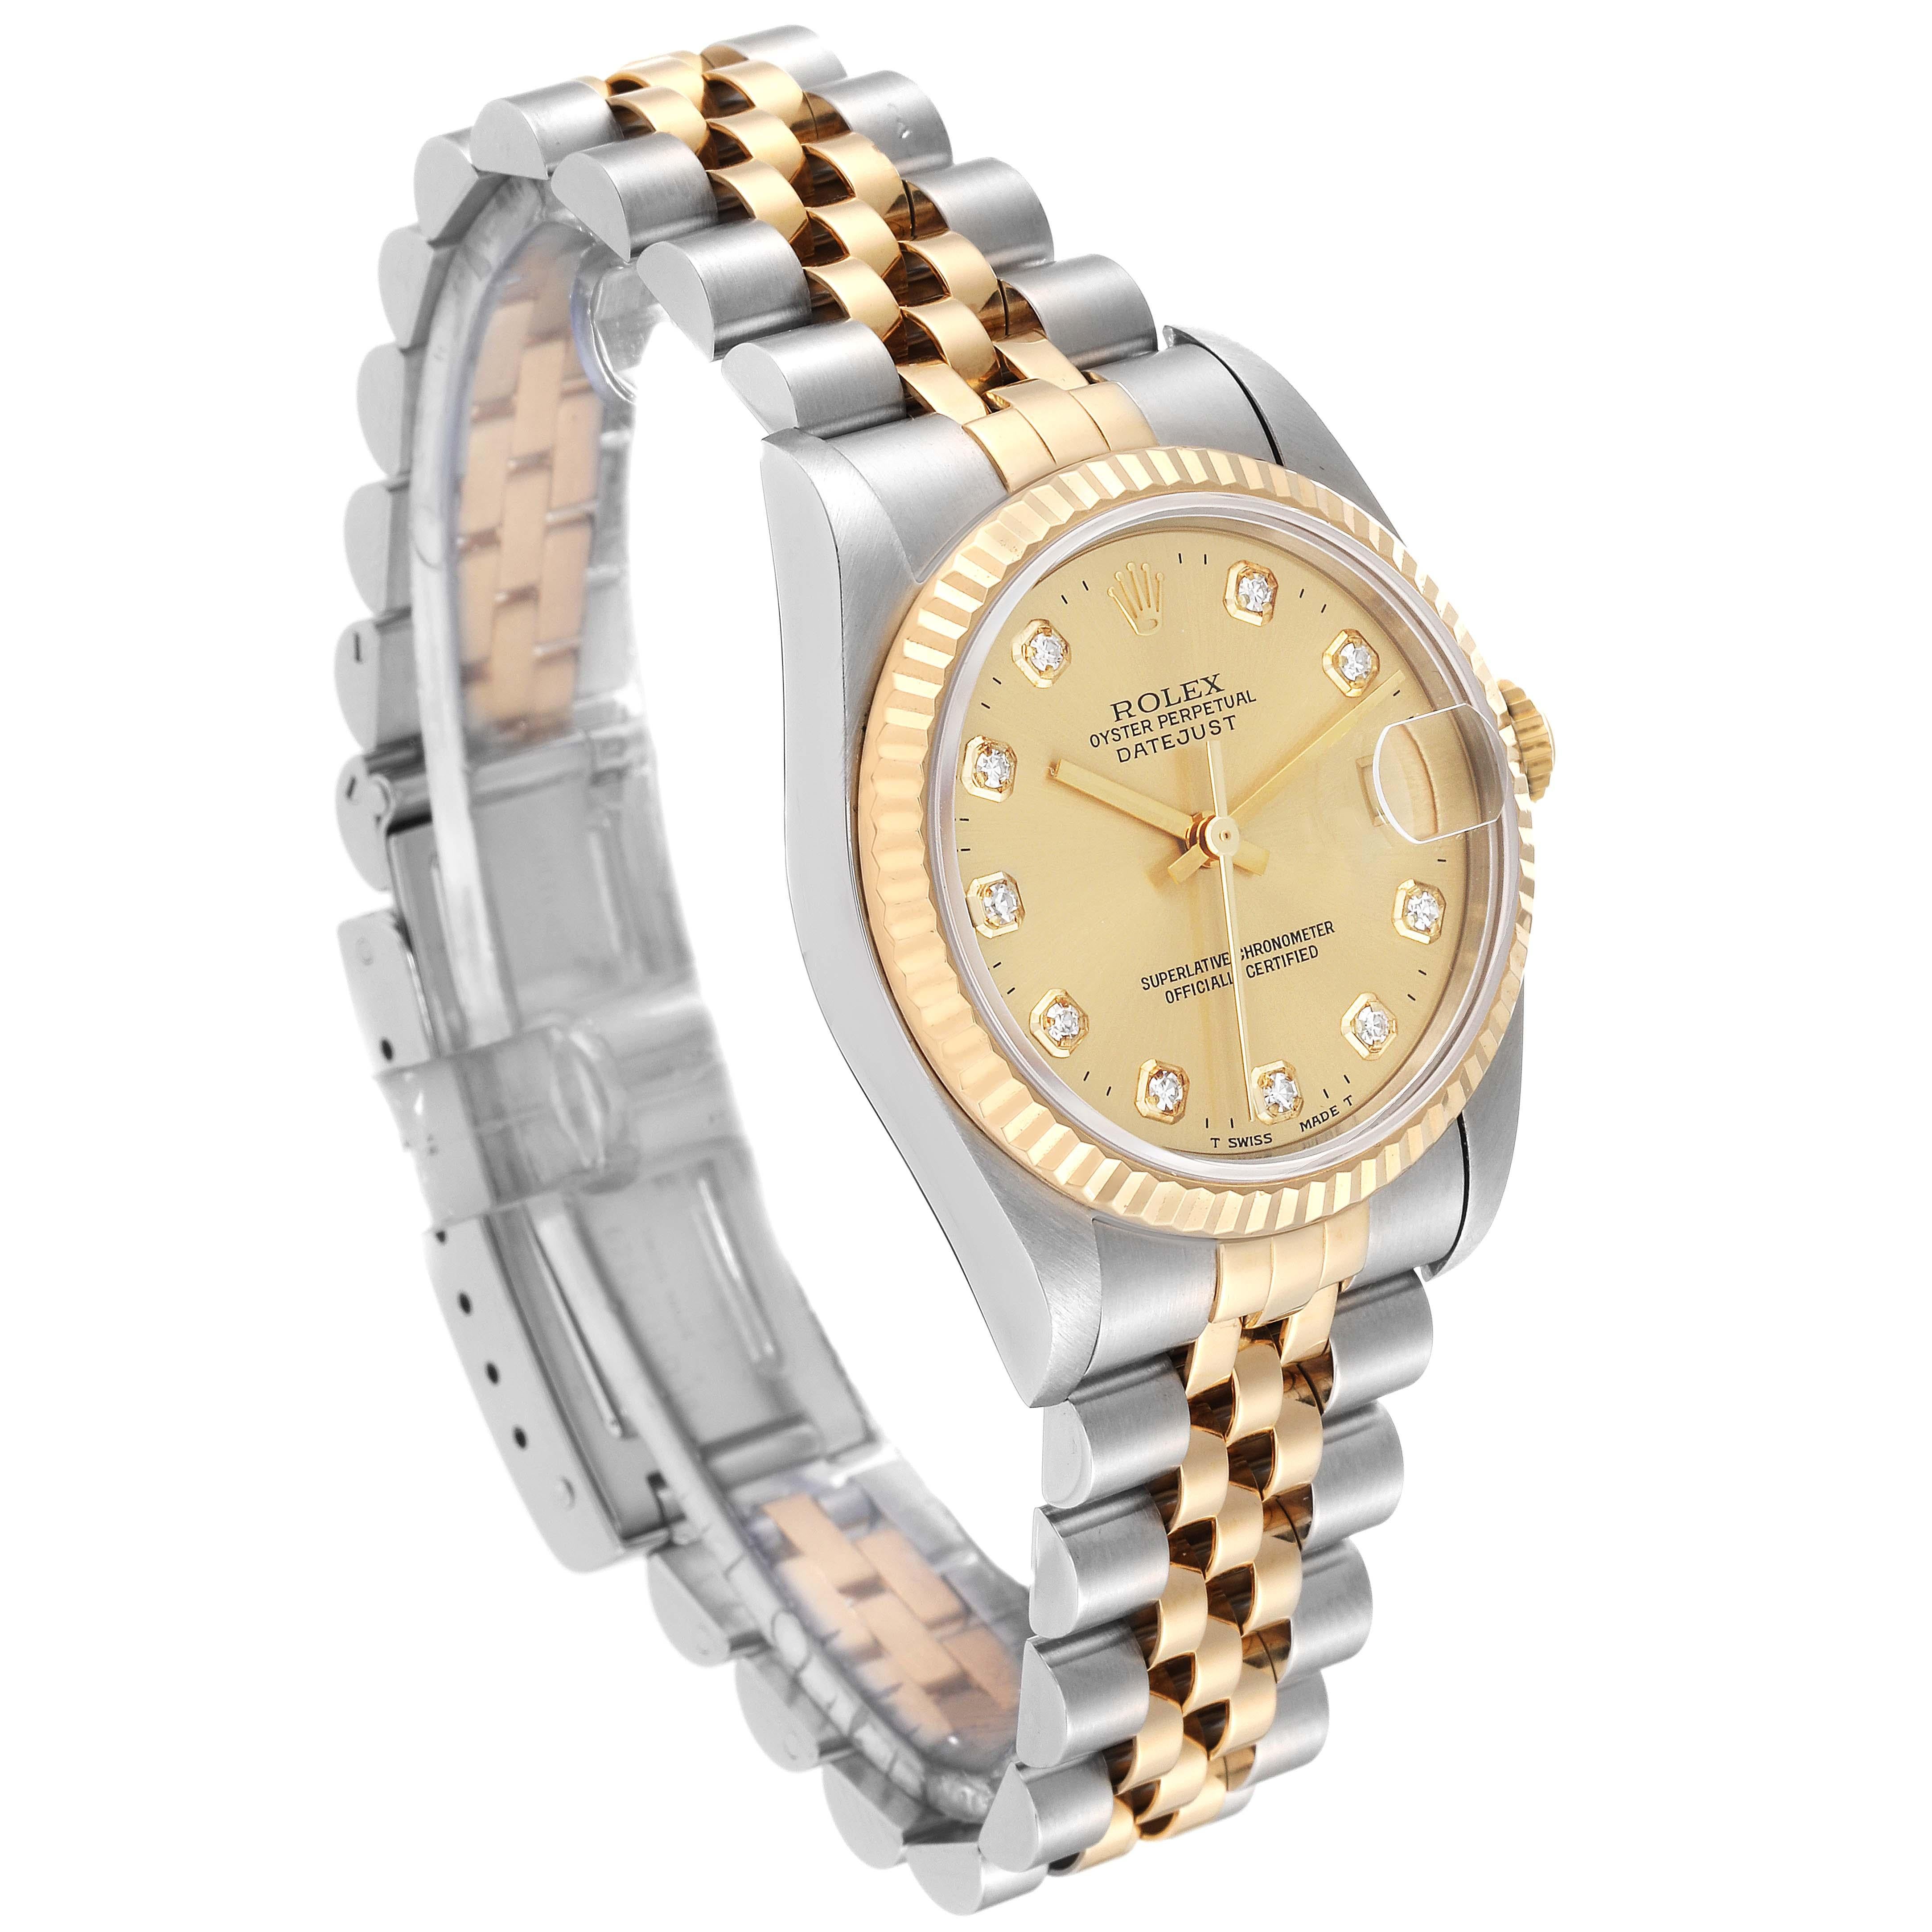 Rolex Datejust Midsize Diamond Dial Steel Yellow Gold Ladies Watch 68273 In Good Condition For Sale In Atlanta, GA